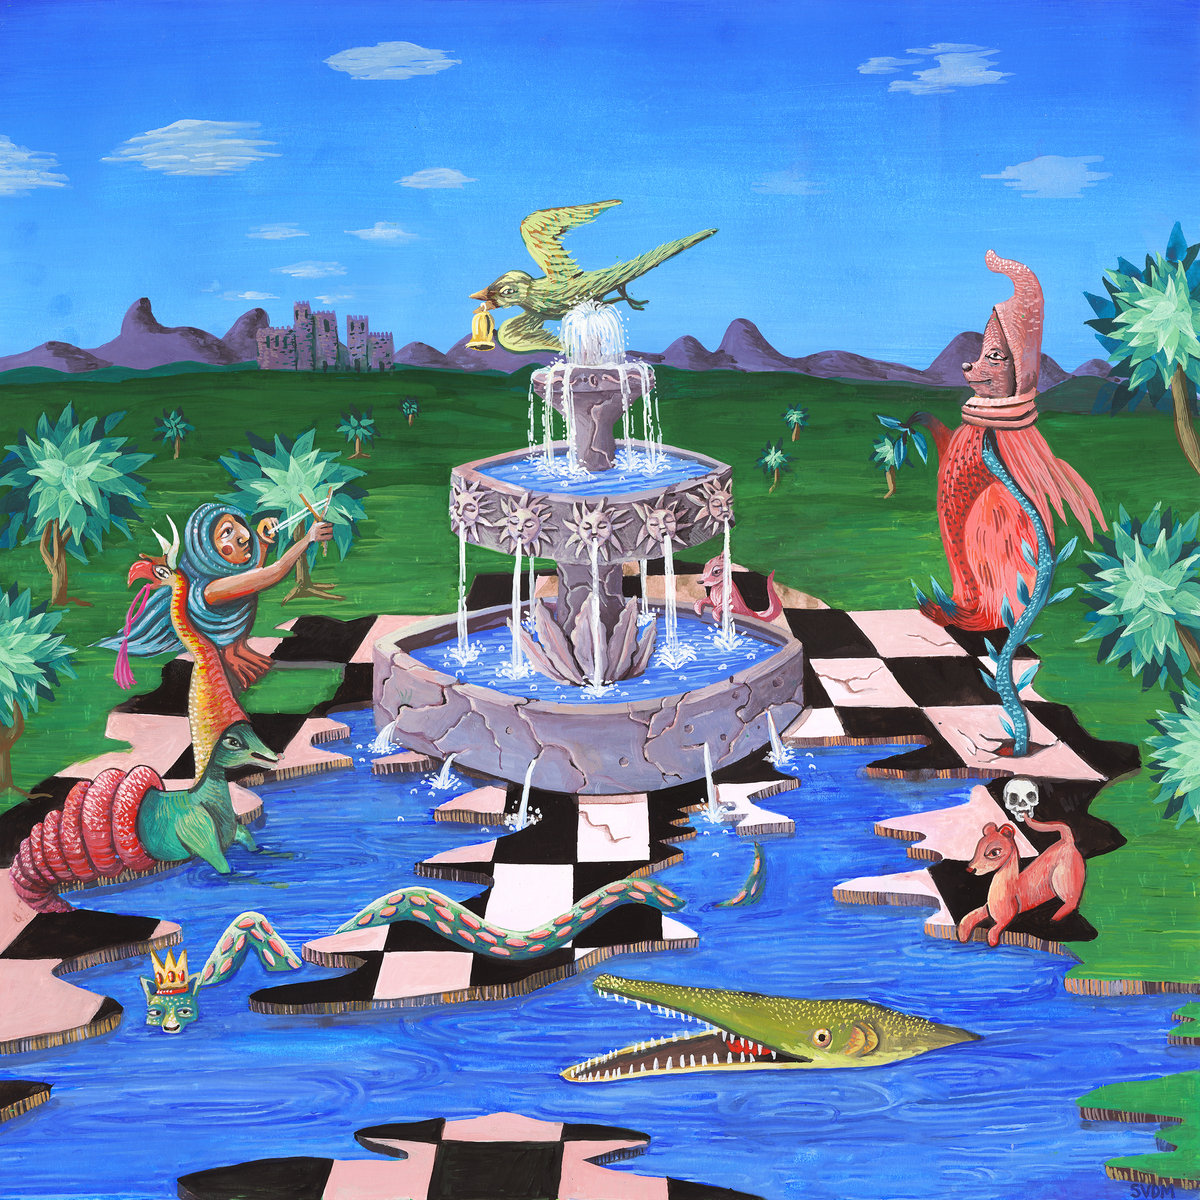 A cracked black and white chess board with blue water below and mystical creatures around it. A small castle is in the distance.